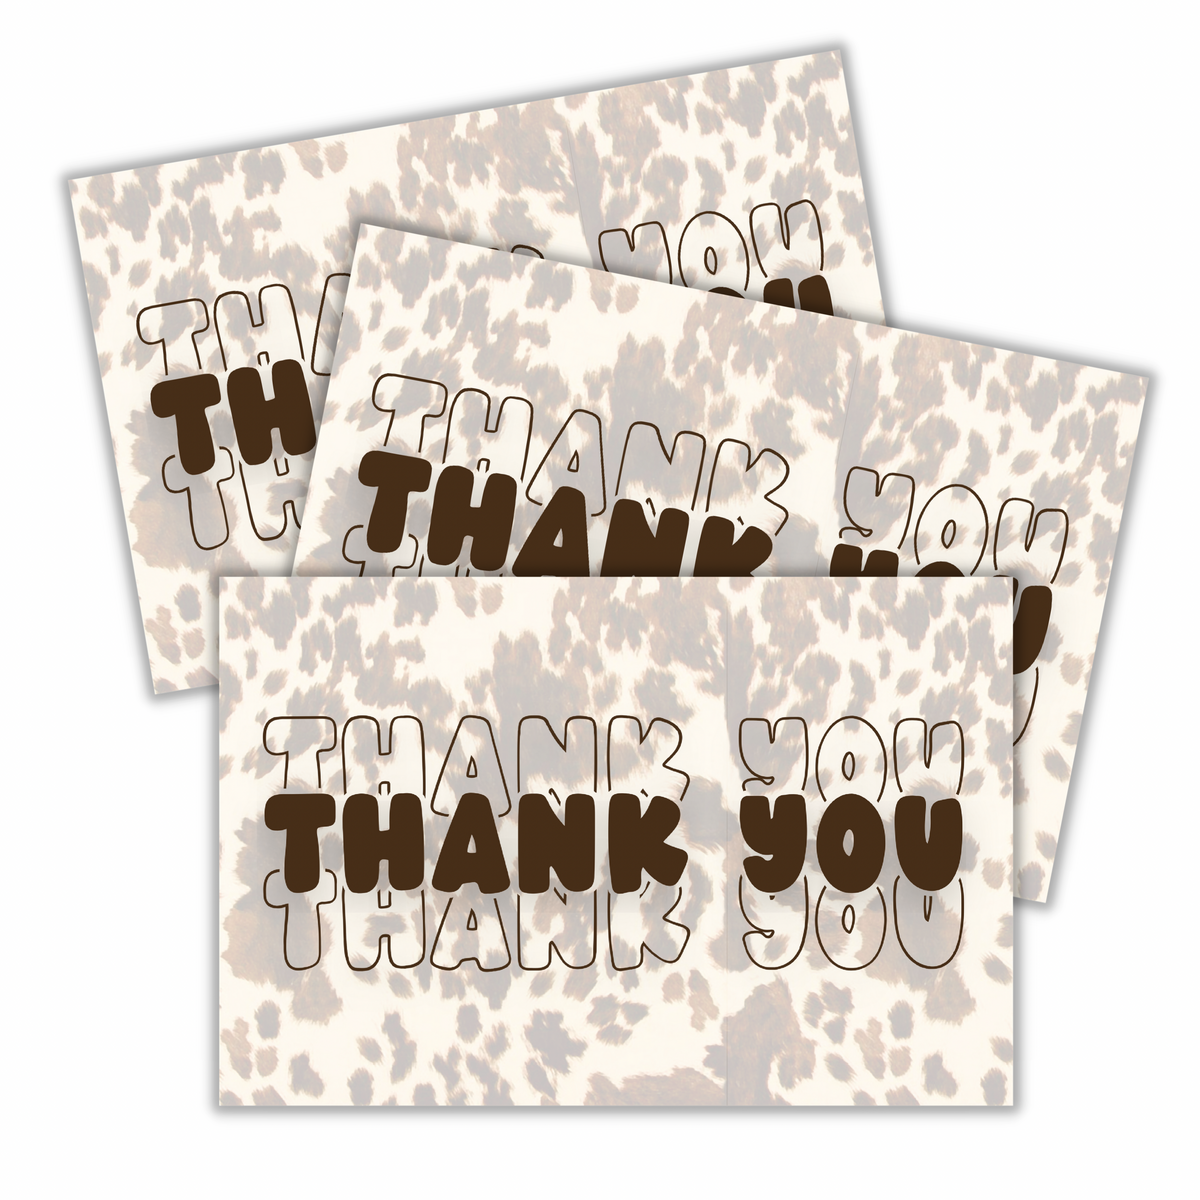 4x6 Package Insert Cards- Thank You So Much – Marley Rae Mailers